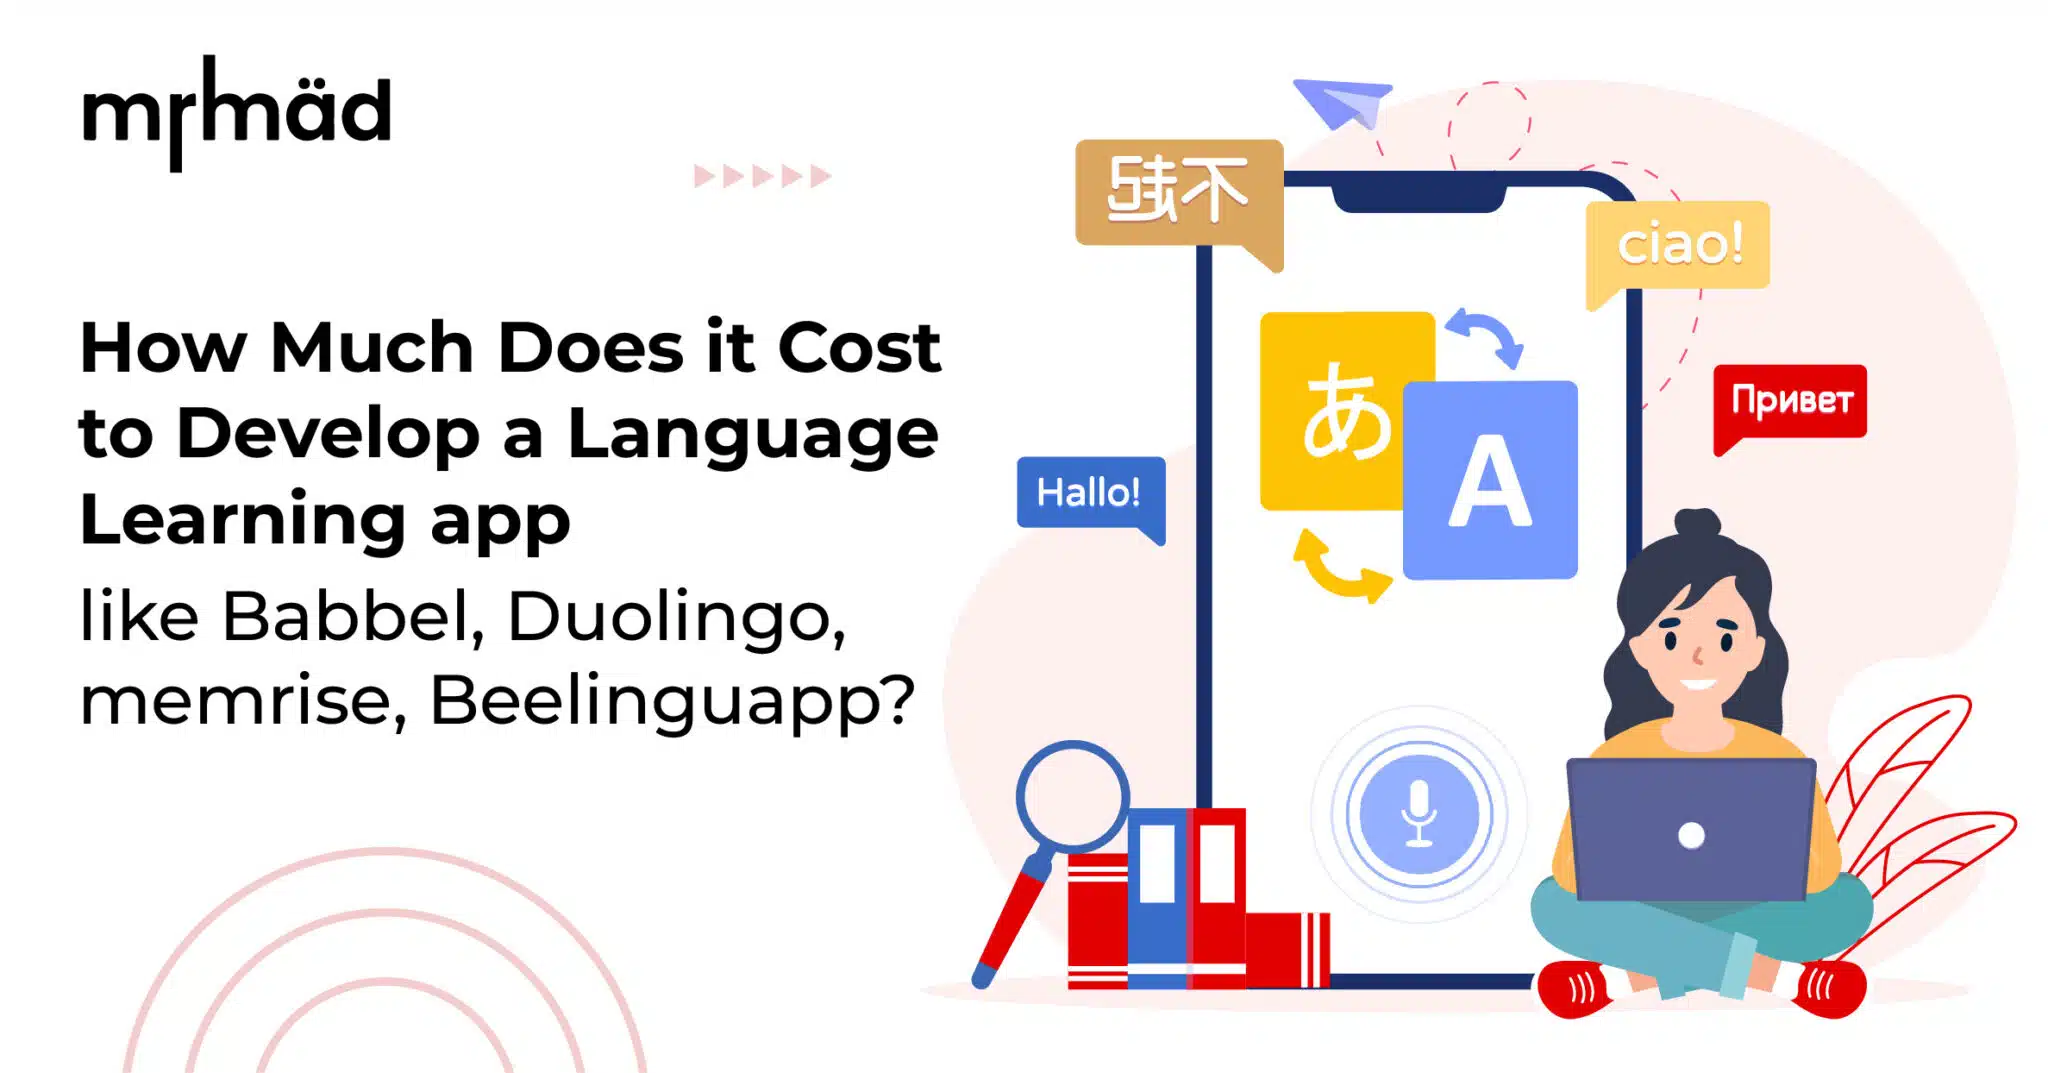 How Much Does it Cost to Develop a Language Learning app like Babbel, Duolingo, memrise, Beelinguapp?